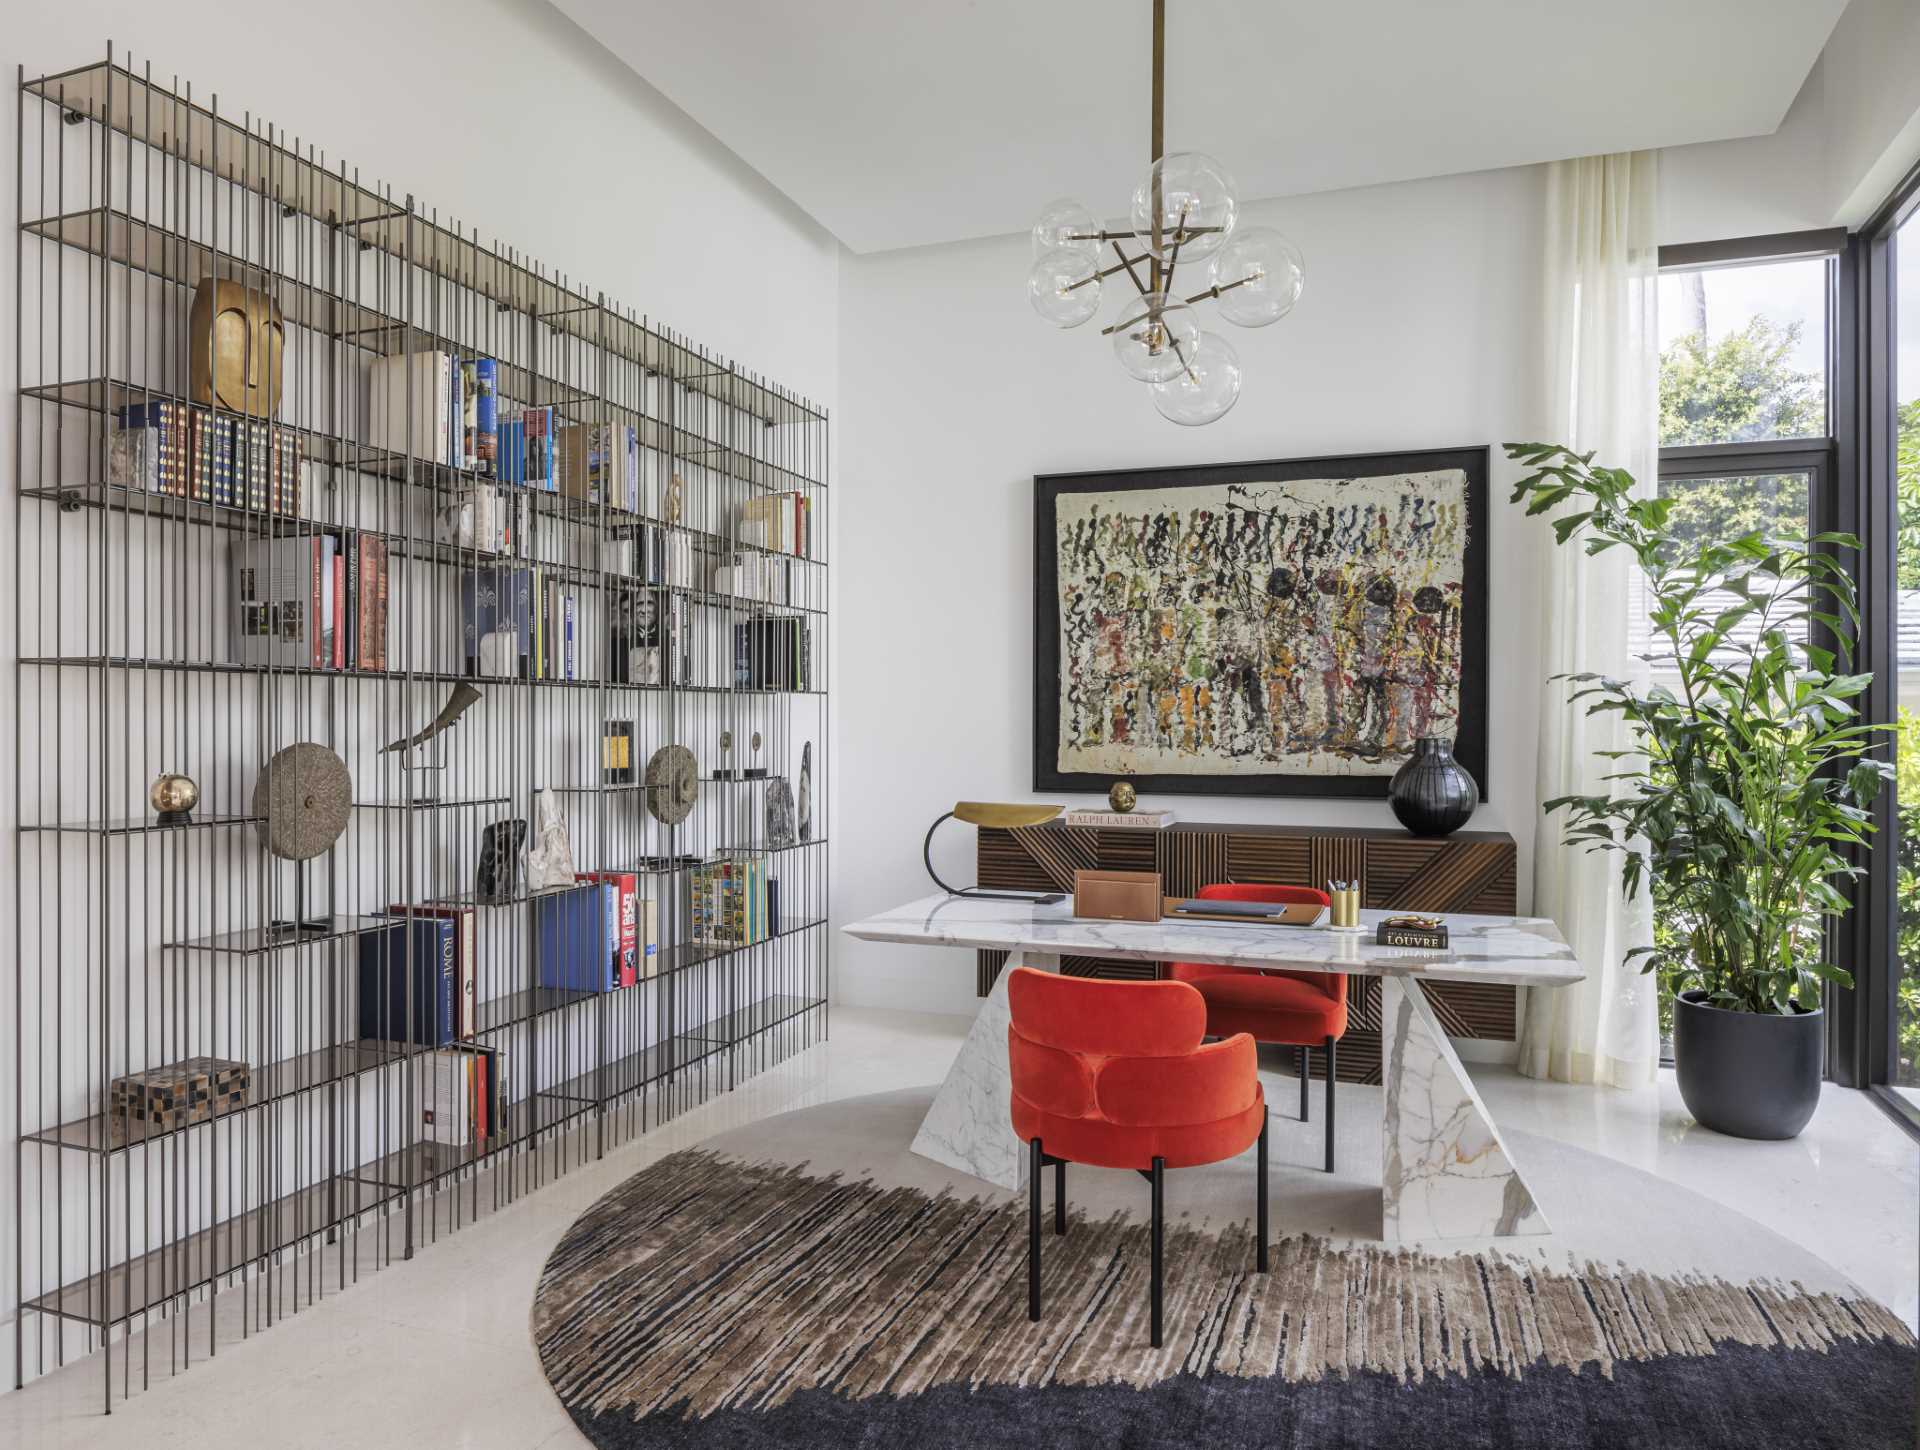 In this home office, there's a desk positioned on a round rug, while the chairs, artwork, and books add color to the room.